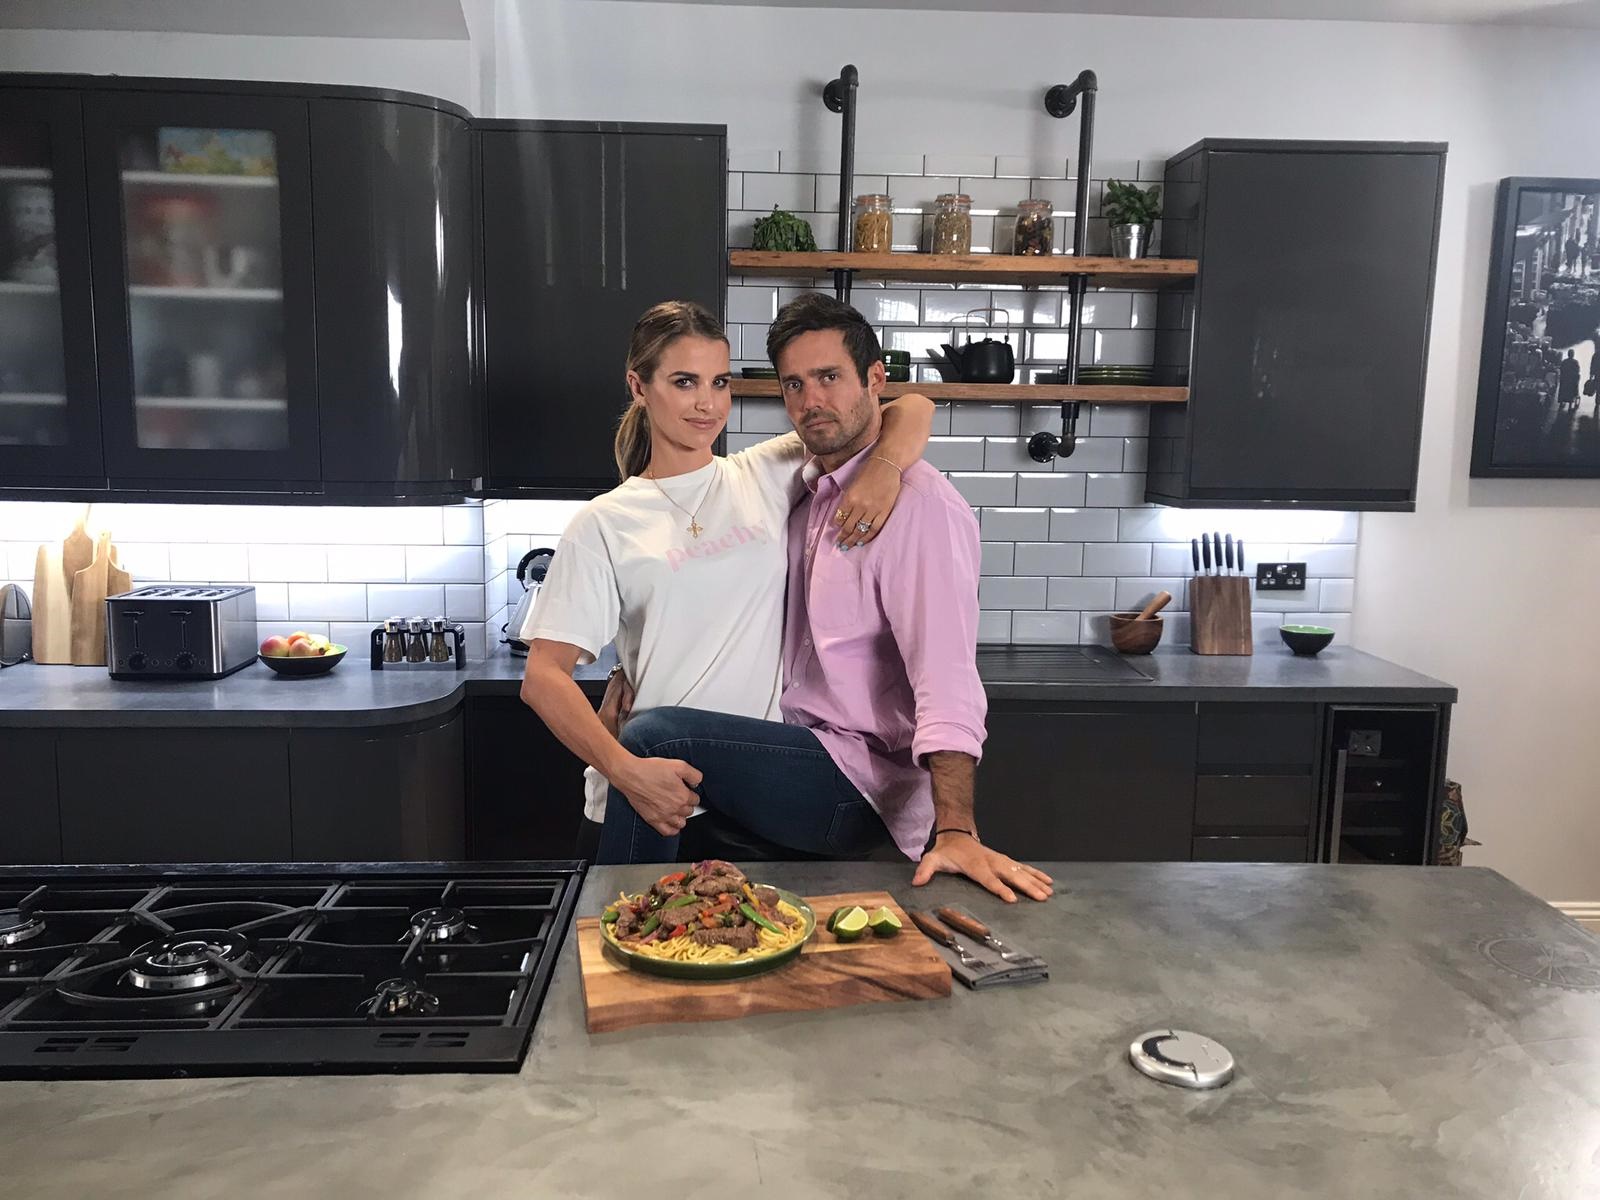 Spencer Matthews, Vogue Williams sitting on a kitchen counter with pizza